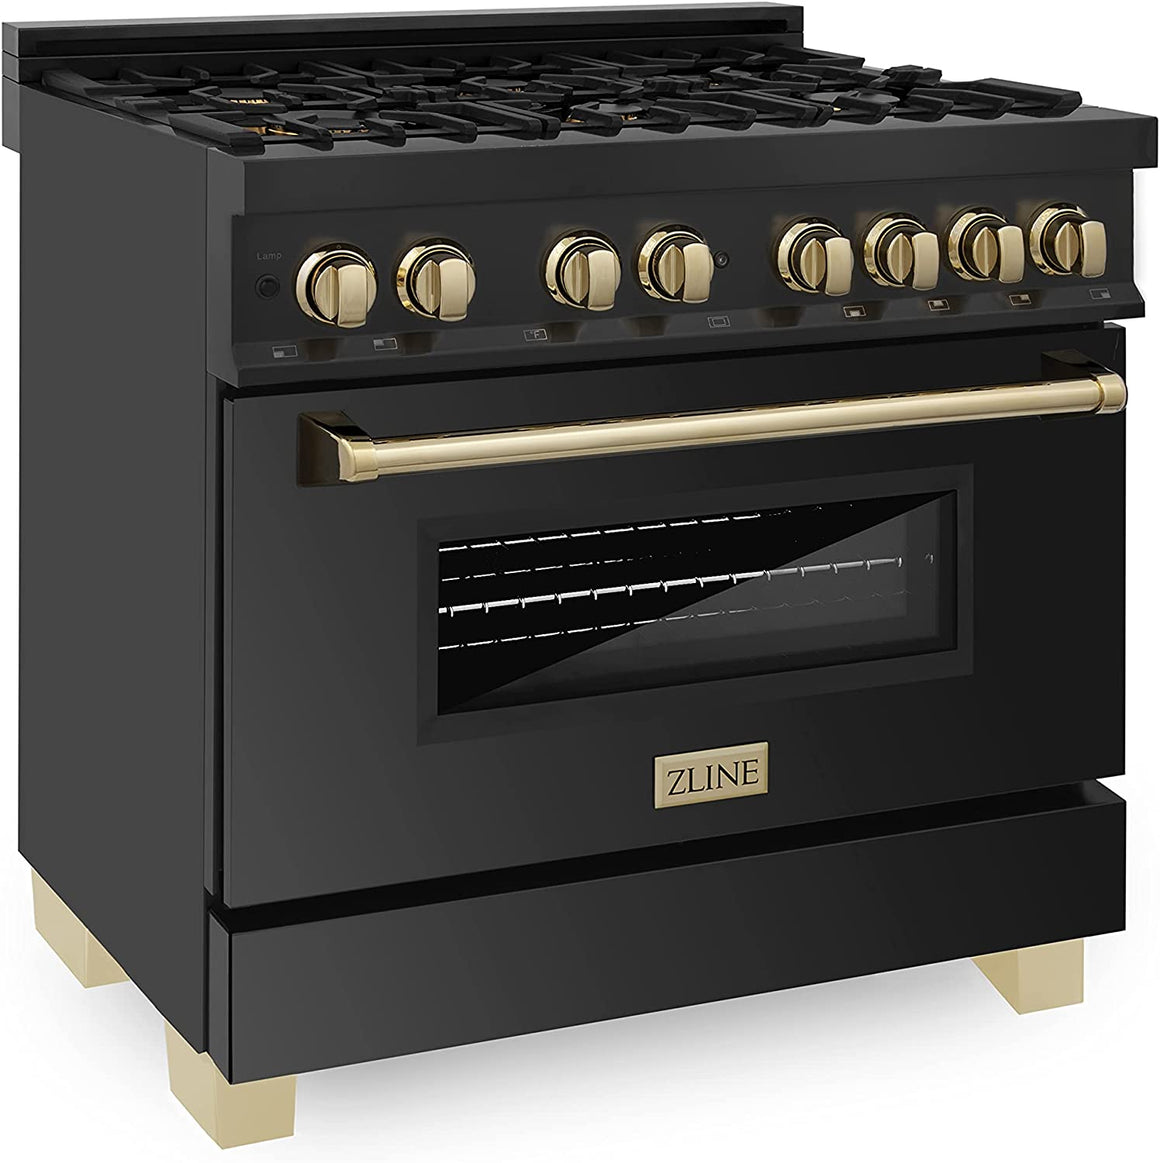 ZLINE Autograph Edition 36" 4.6 cu. ft. Dual Fuel Range with Gas Stove and Electric Oven in Black Stainless Steel with Gold Accents (RABZ-36-G)